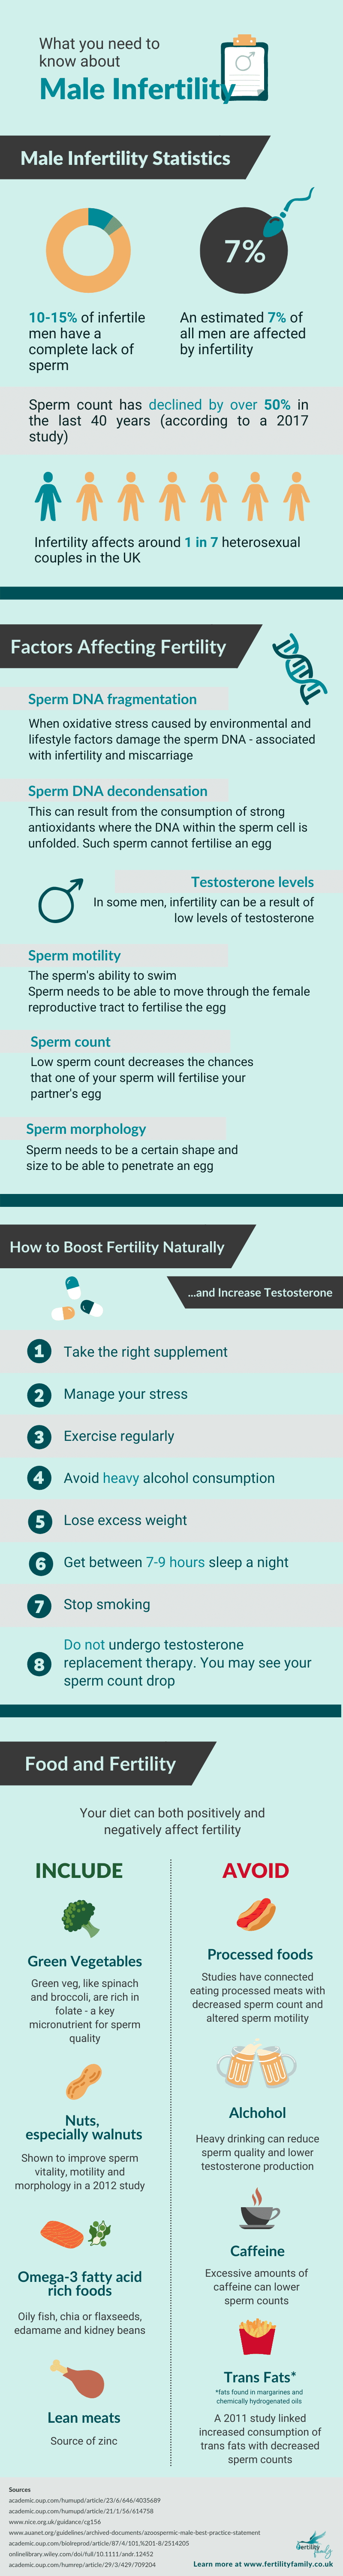 What are the signs and symptoms of infertility? » British Fertility Society